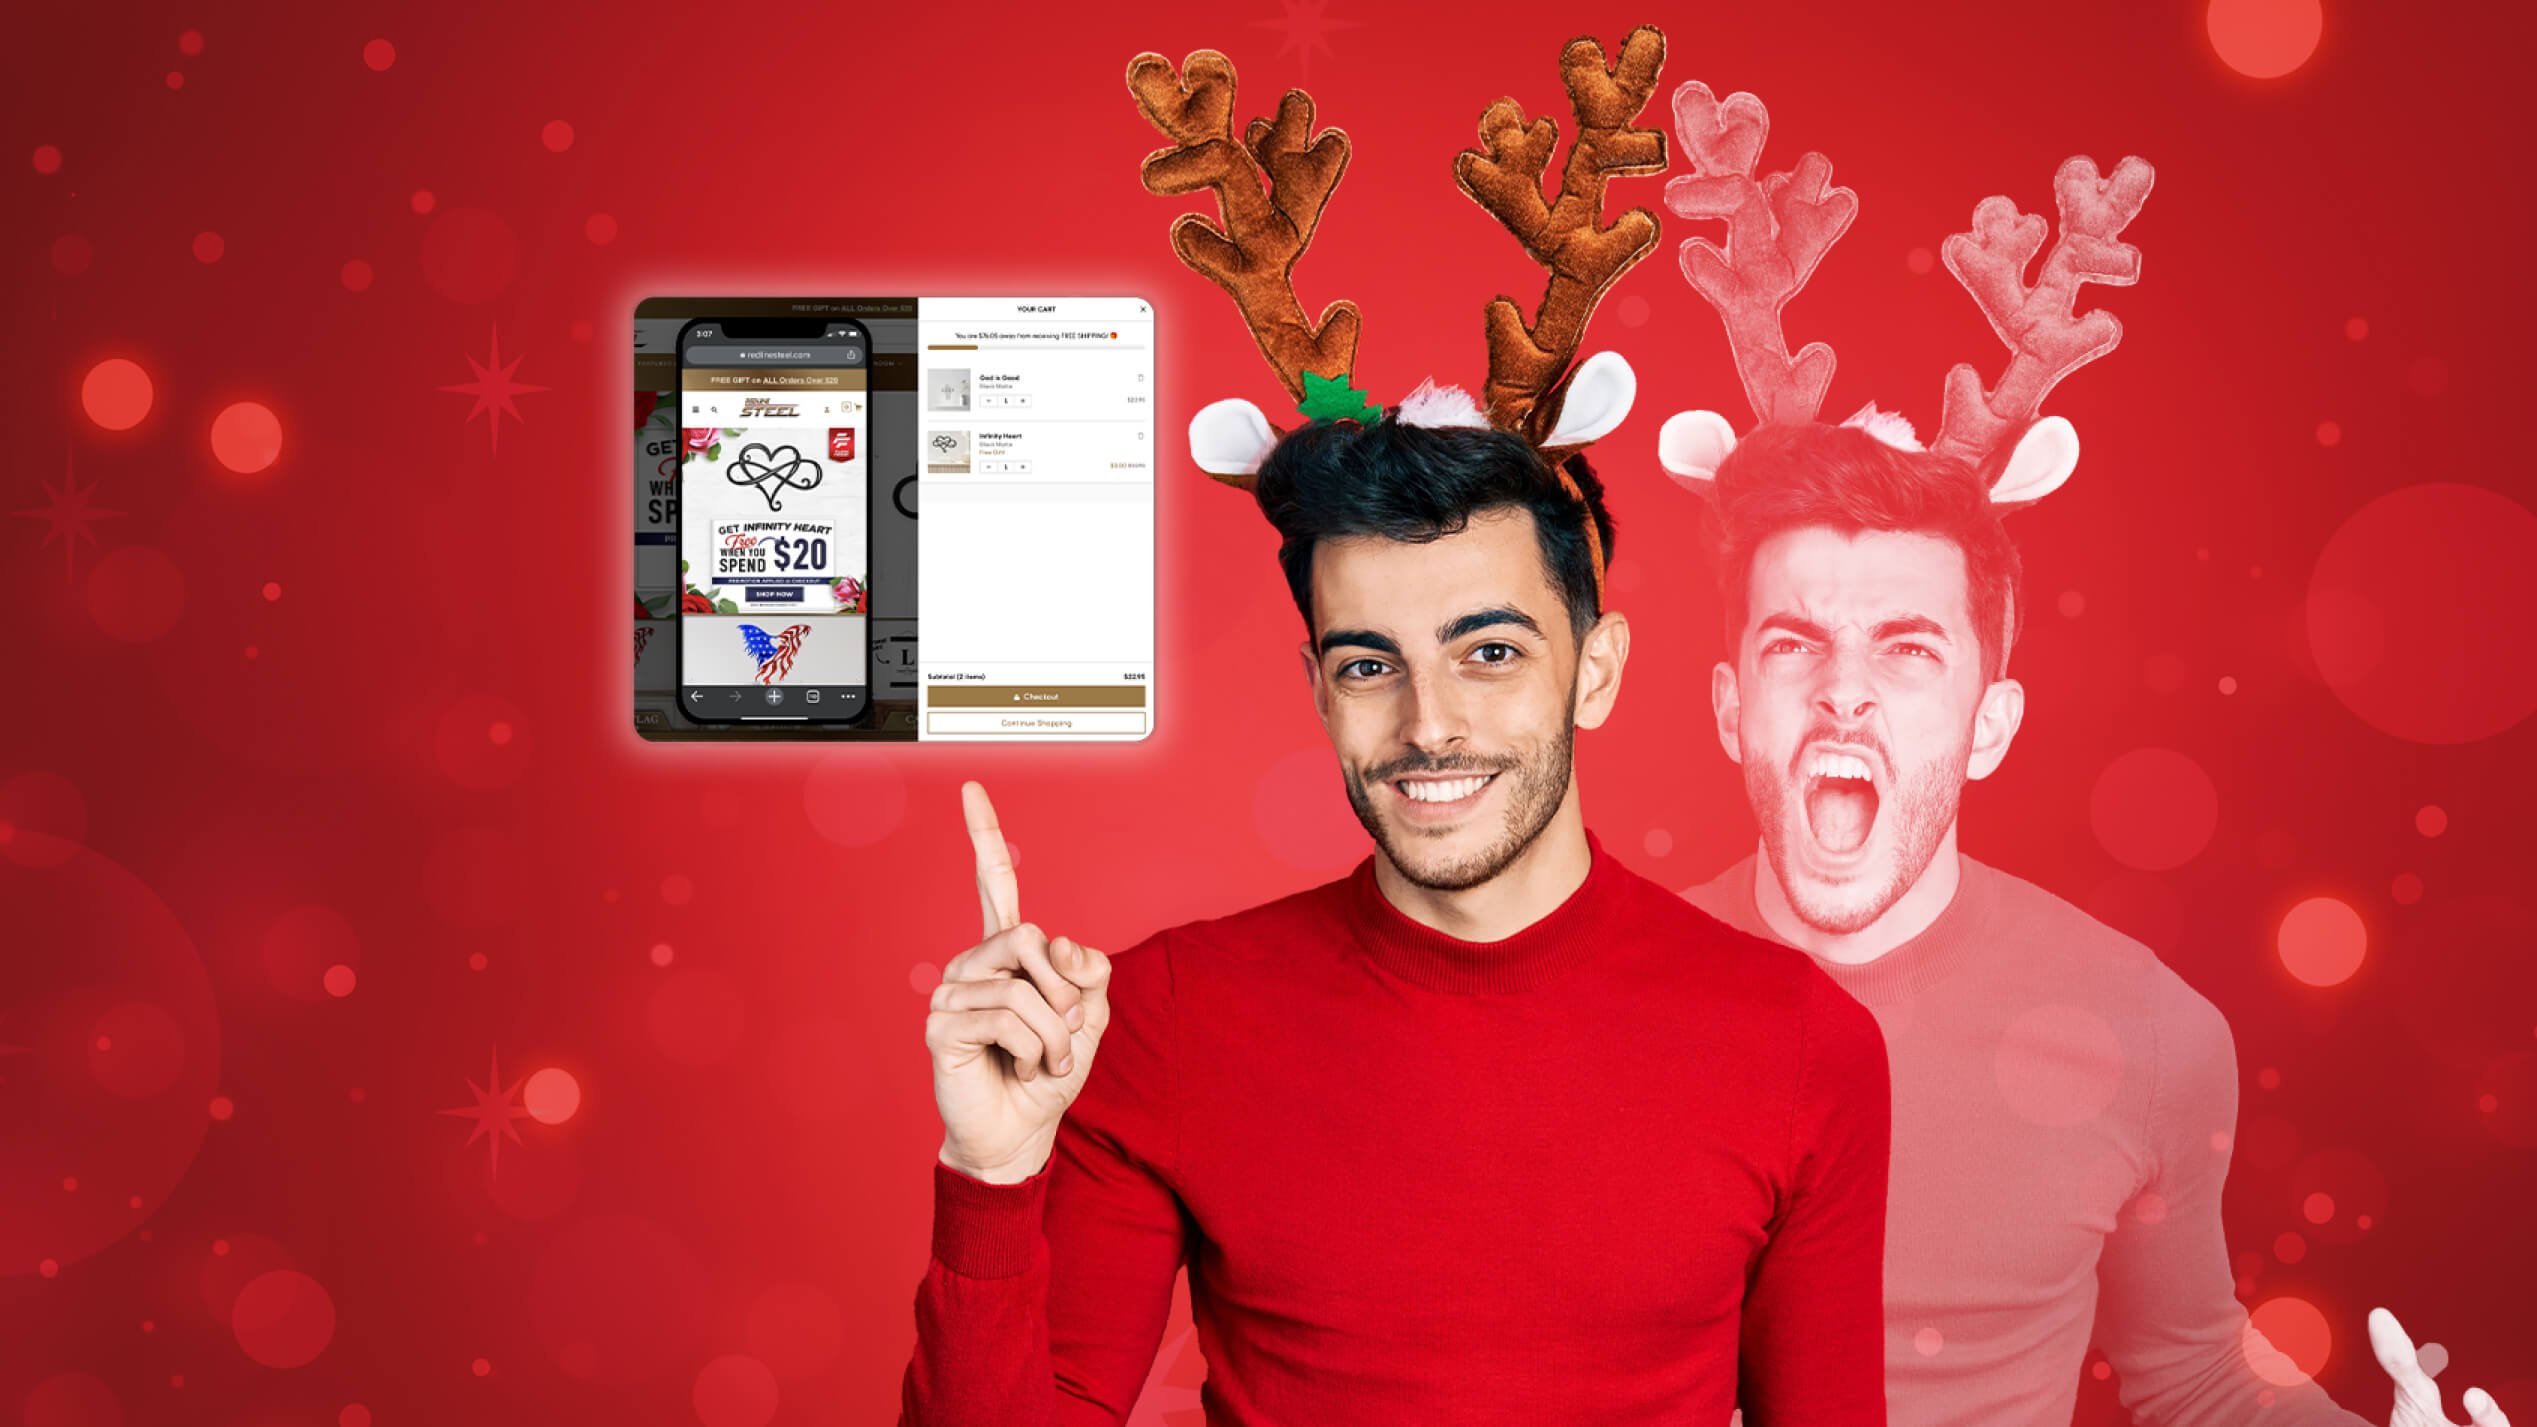 Go From Holiday Nightmare to Holiday Magic: Use Intelligent Personalization to Power Your Online Store, Optimize for Retention, and Win the Holidays